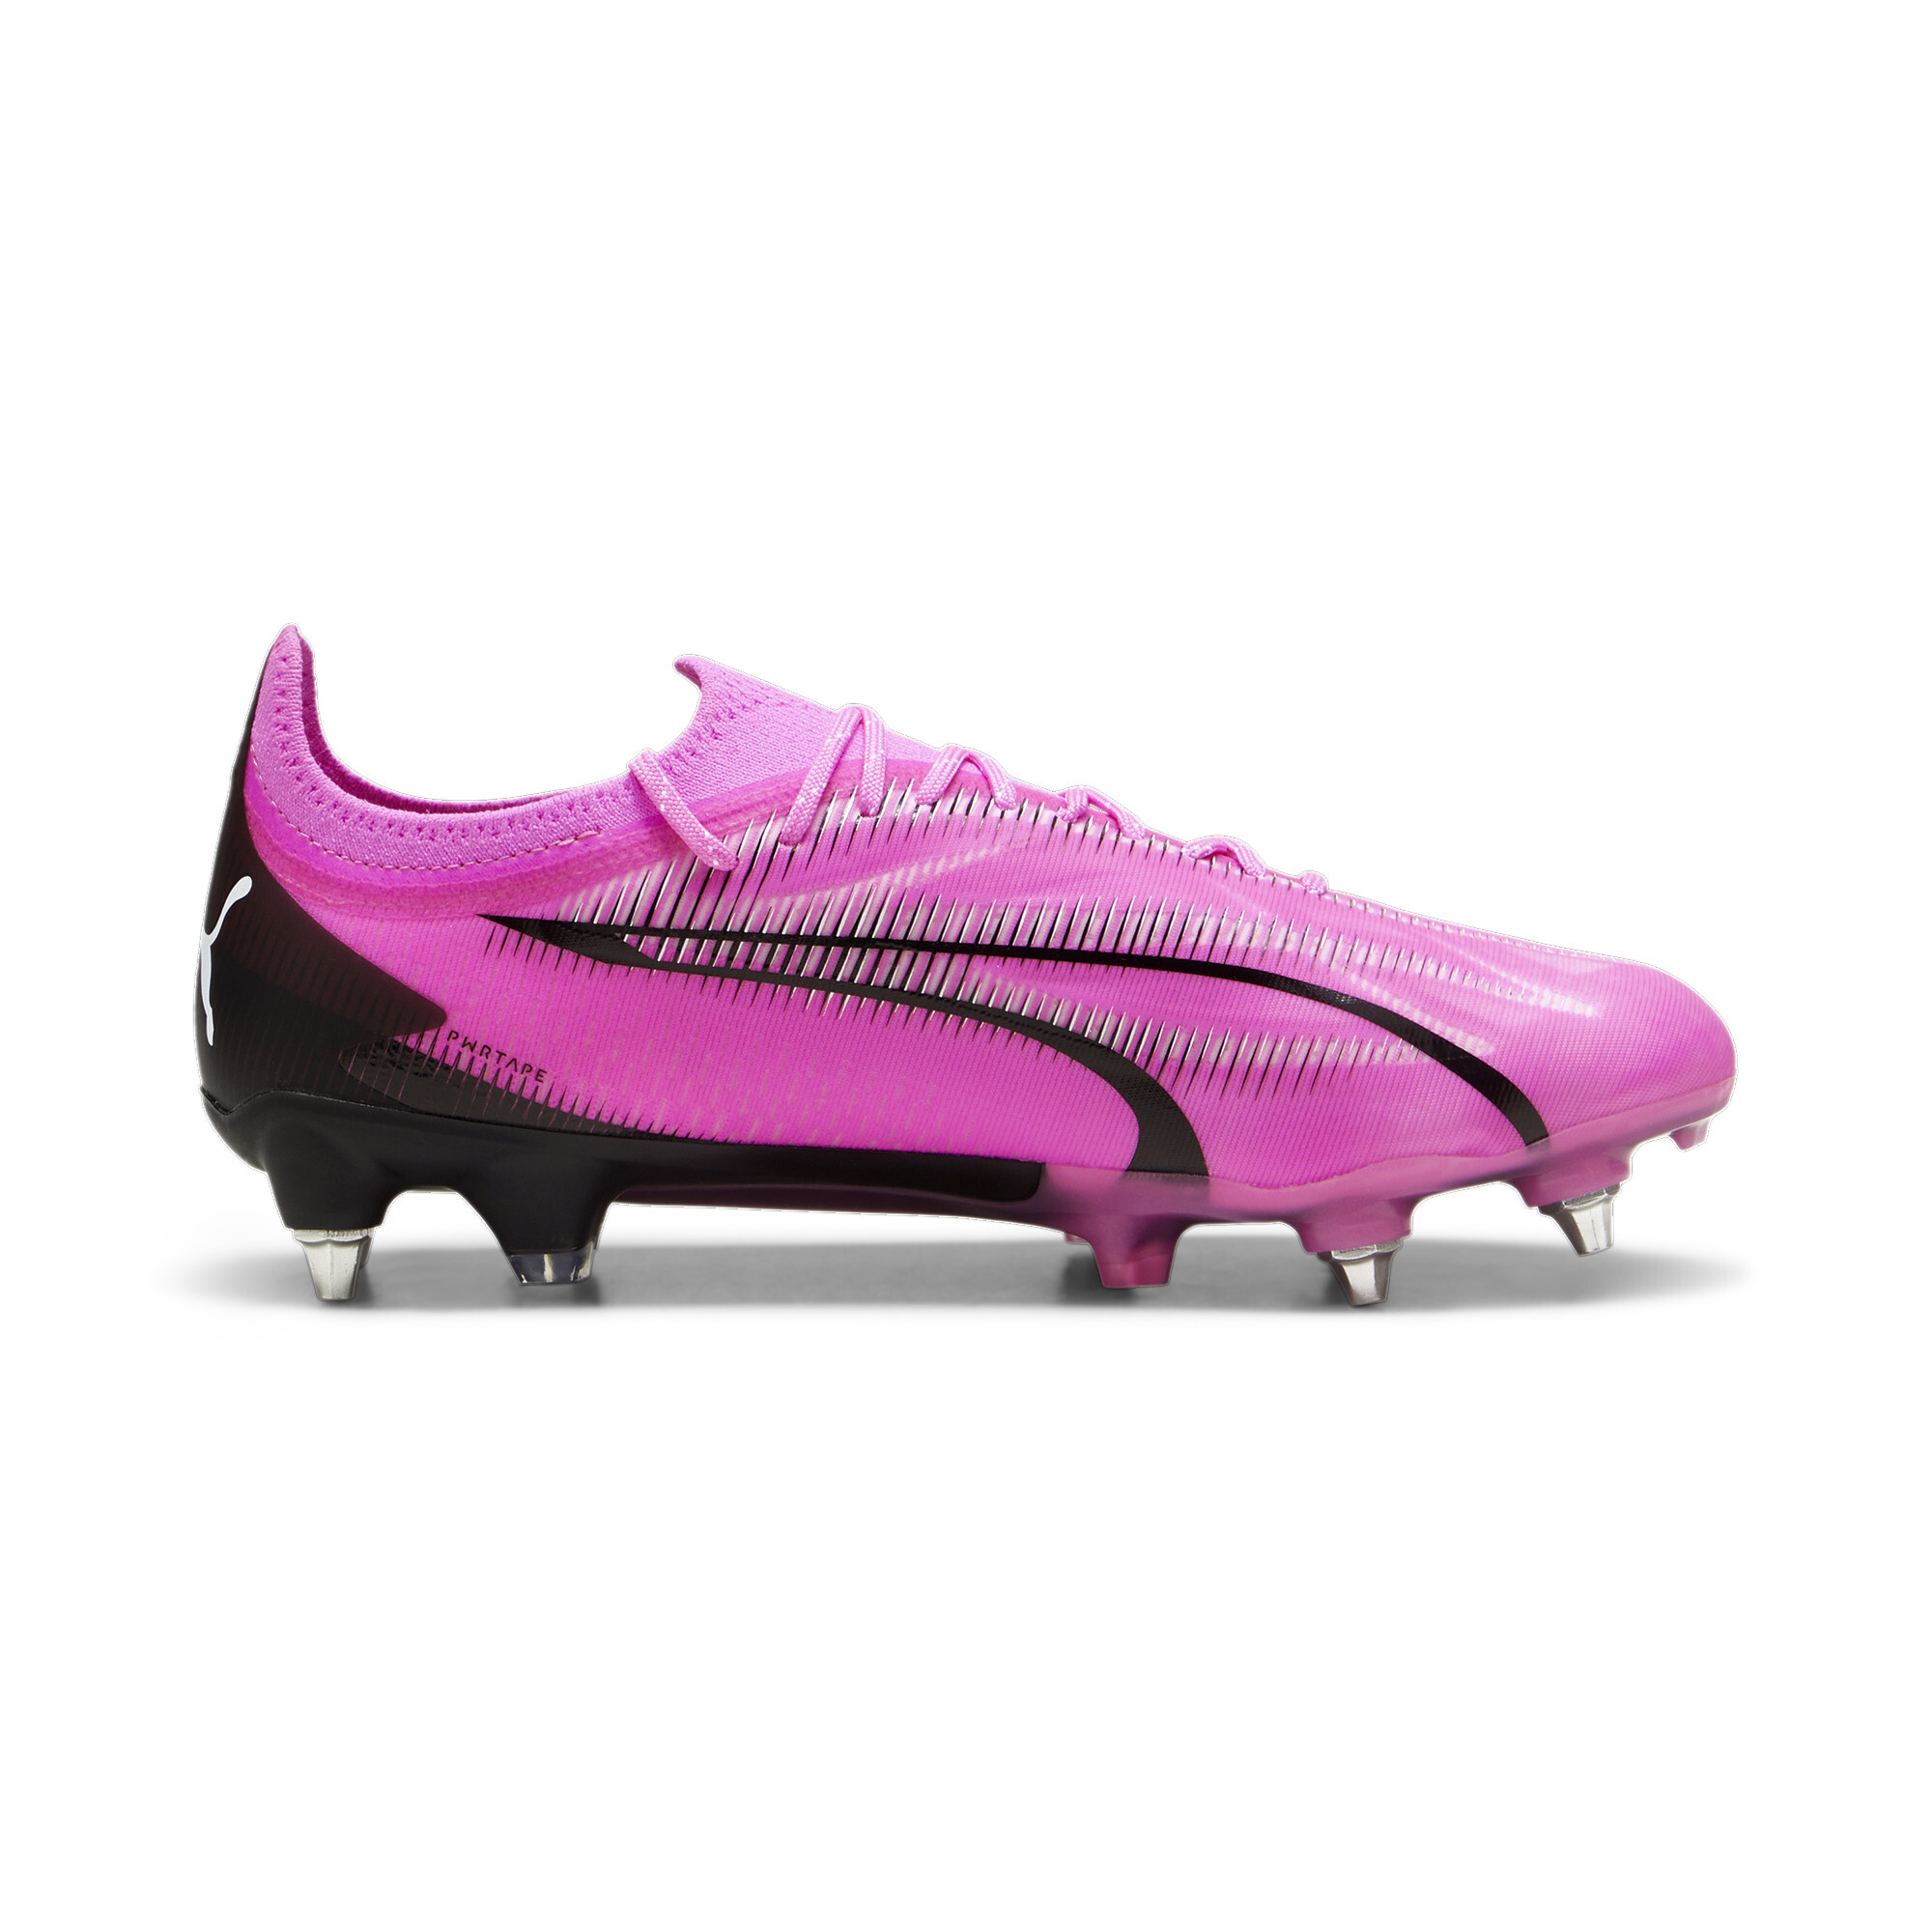 Puma ULTRA ULTIMATE Mx SG Football Boots, Pink, Size 48, Shoes